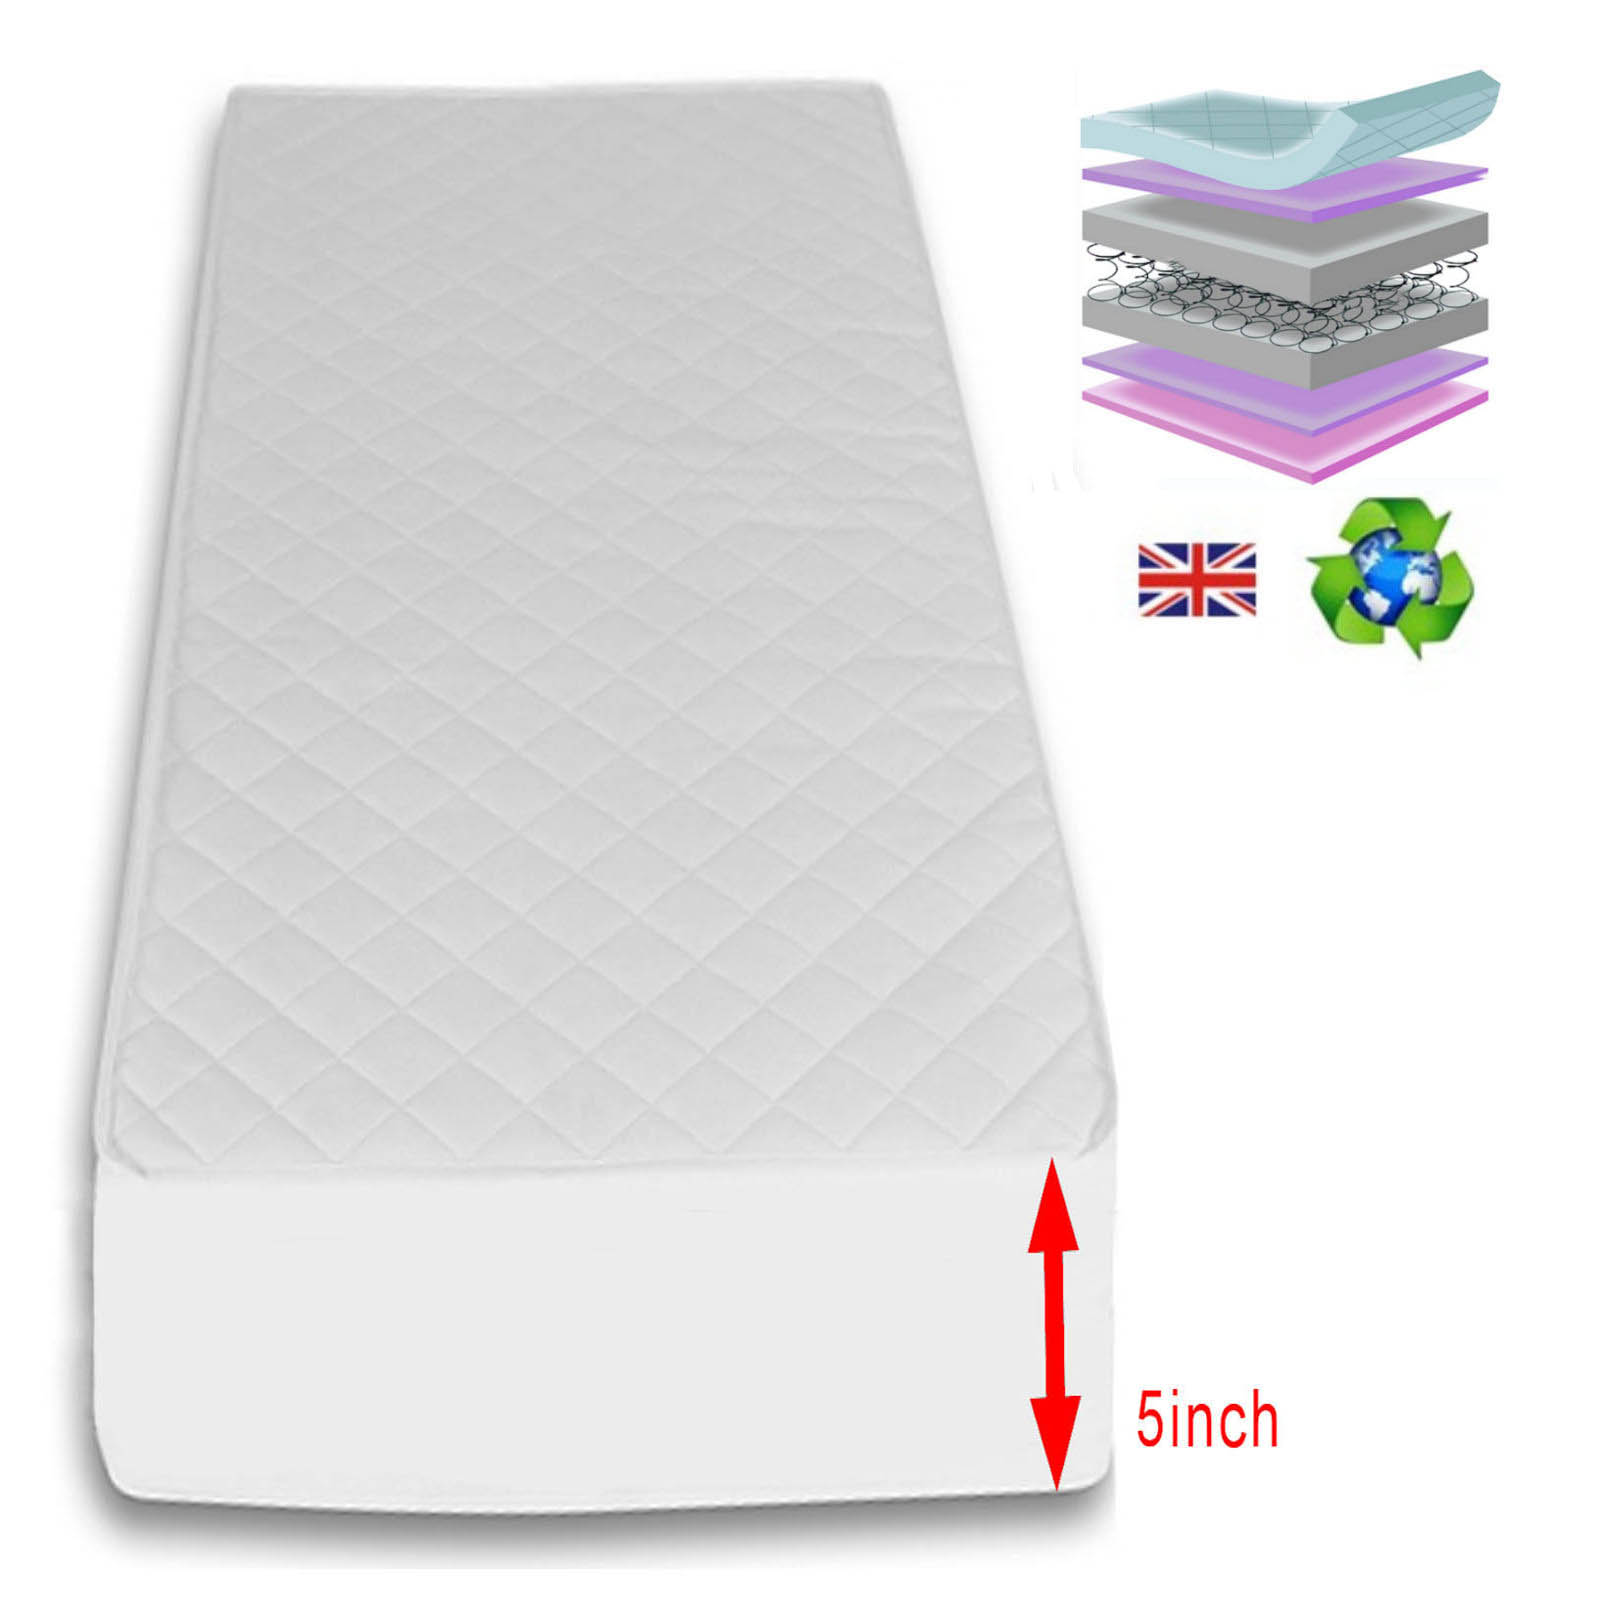 Puggle 5 Inch Deluxe Maxi Air Cool Cot Bed Safety Mattress (Fits SnuzKot) 117 x 68cm